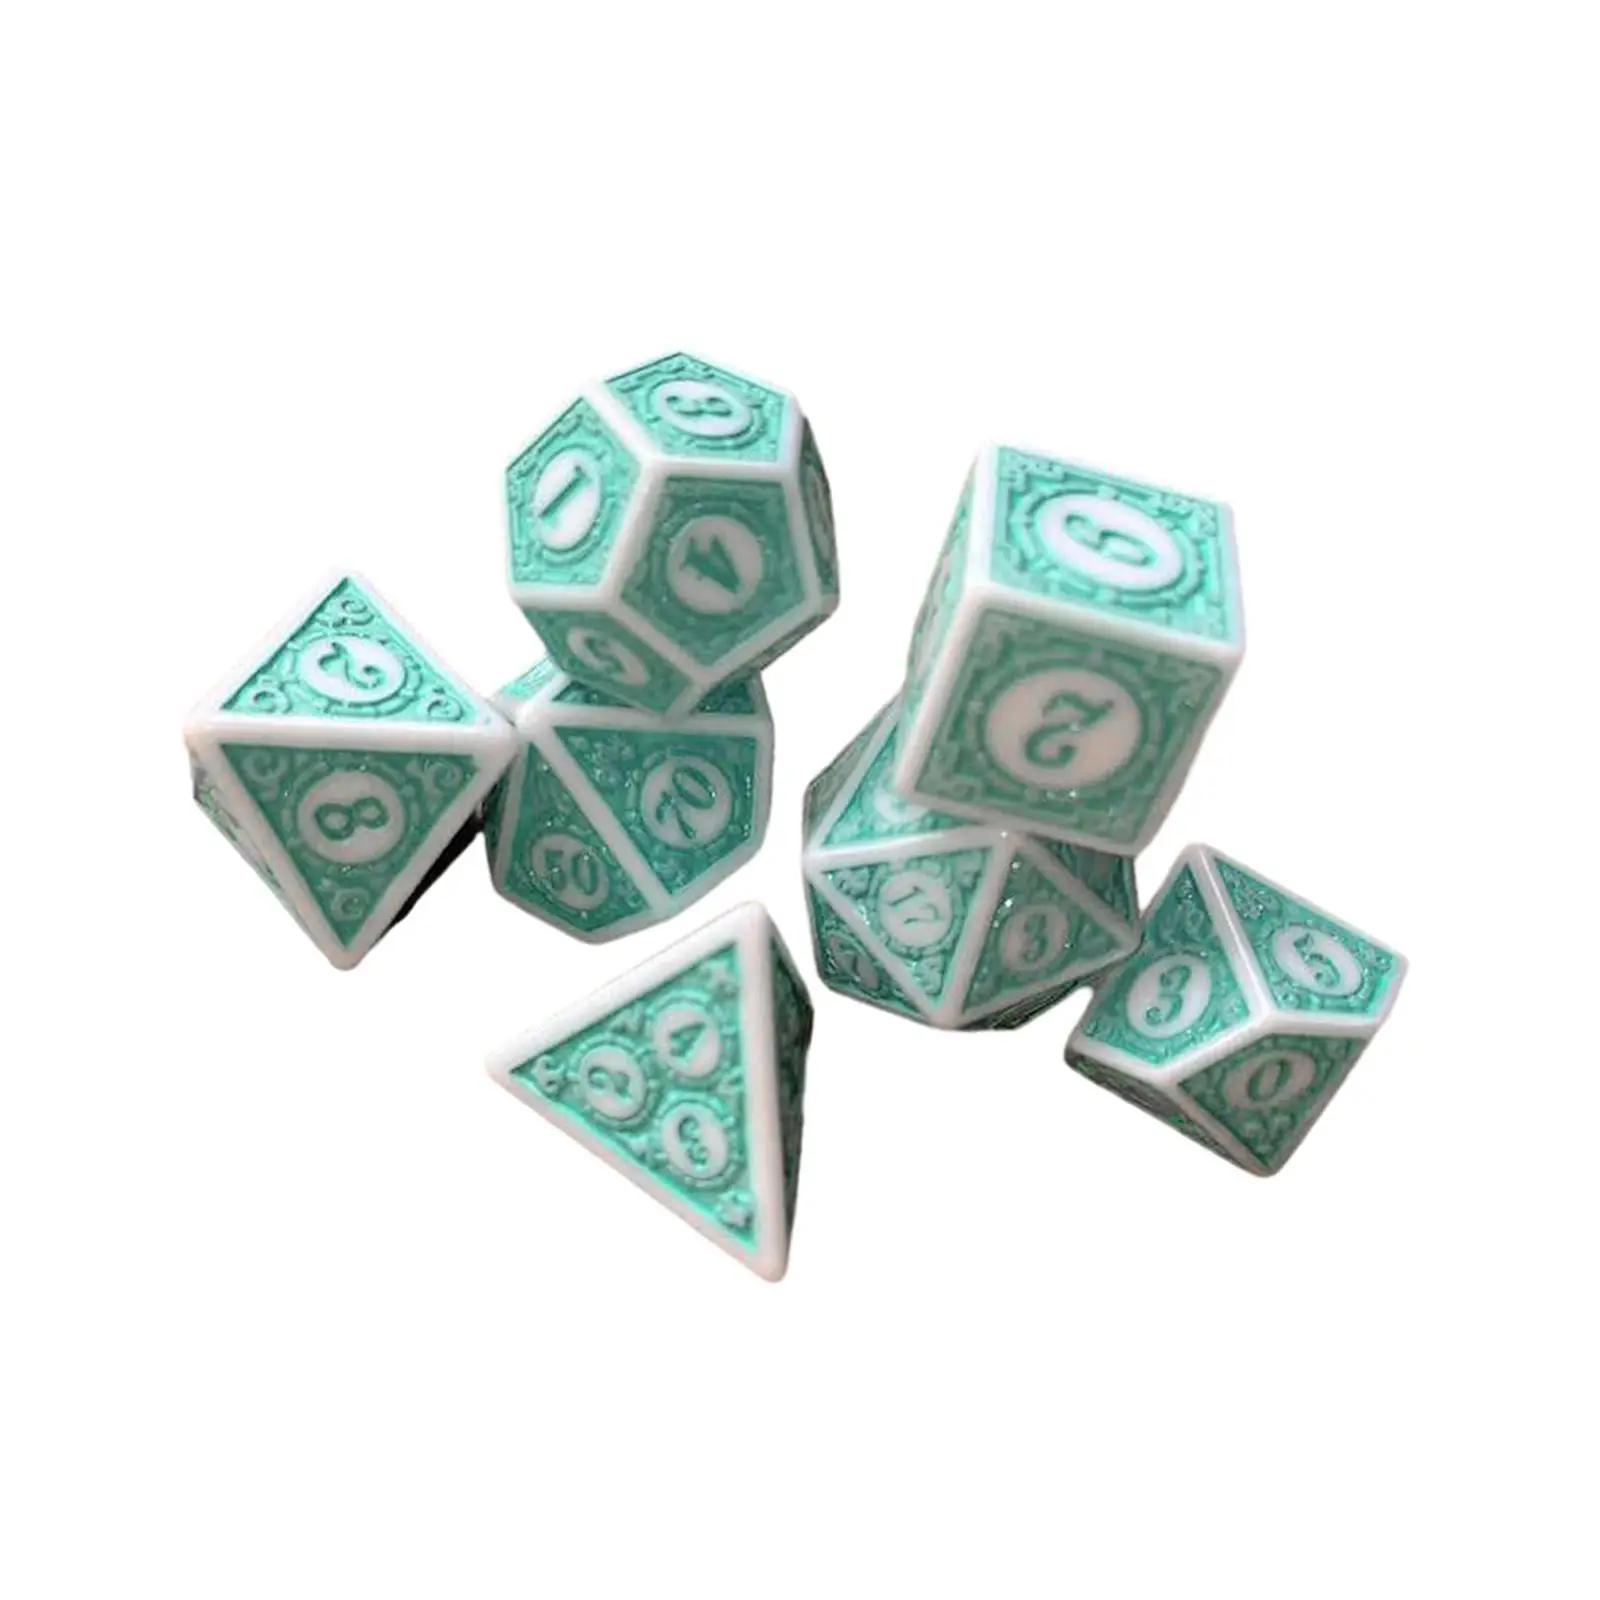 7x Game Dices Set Party Game Dices Party Favors Math Counting Teaching Aids Dice Set for KTV Bar Party Card Games Card Game